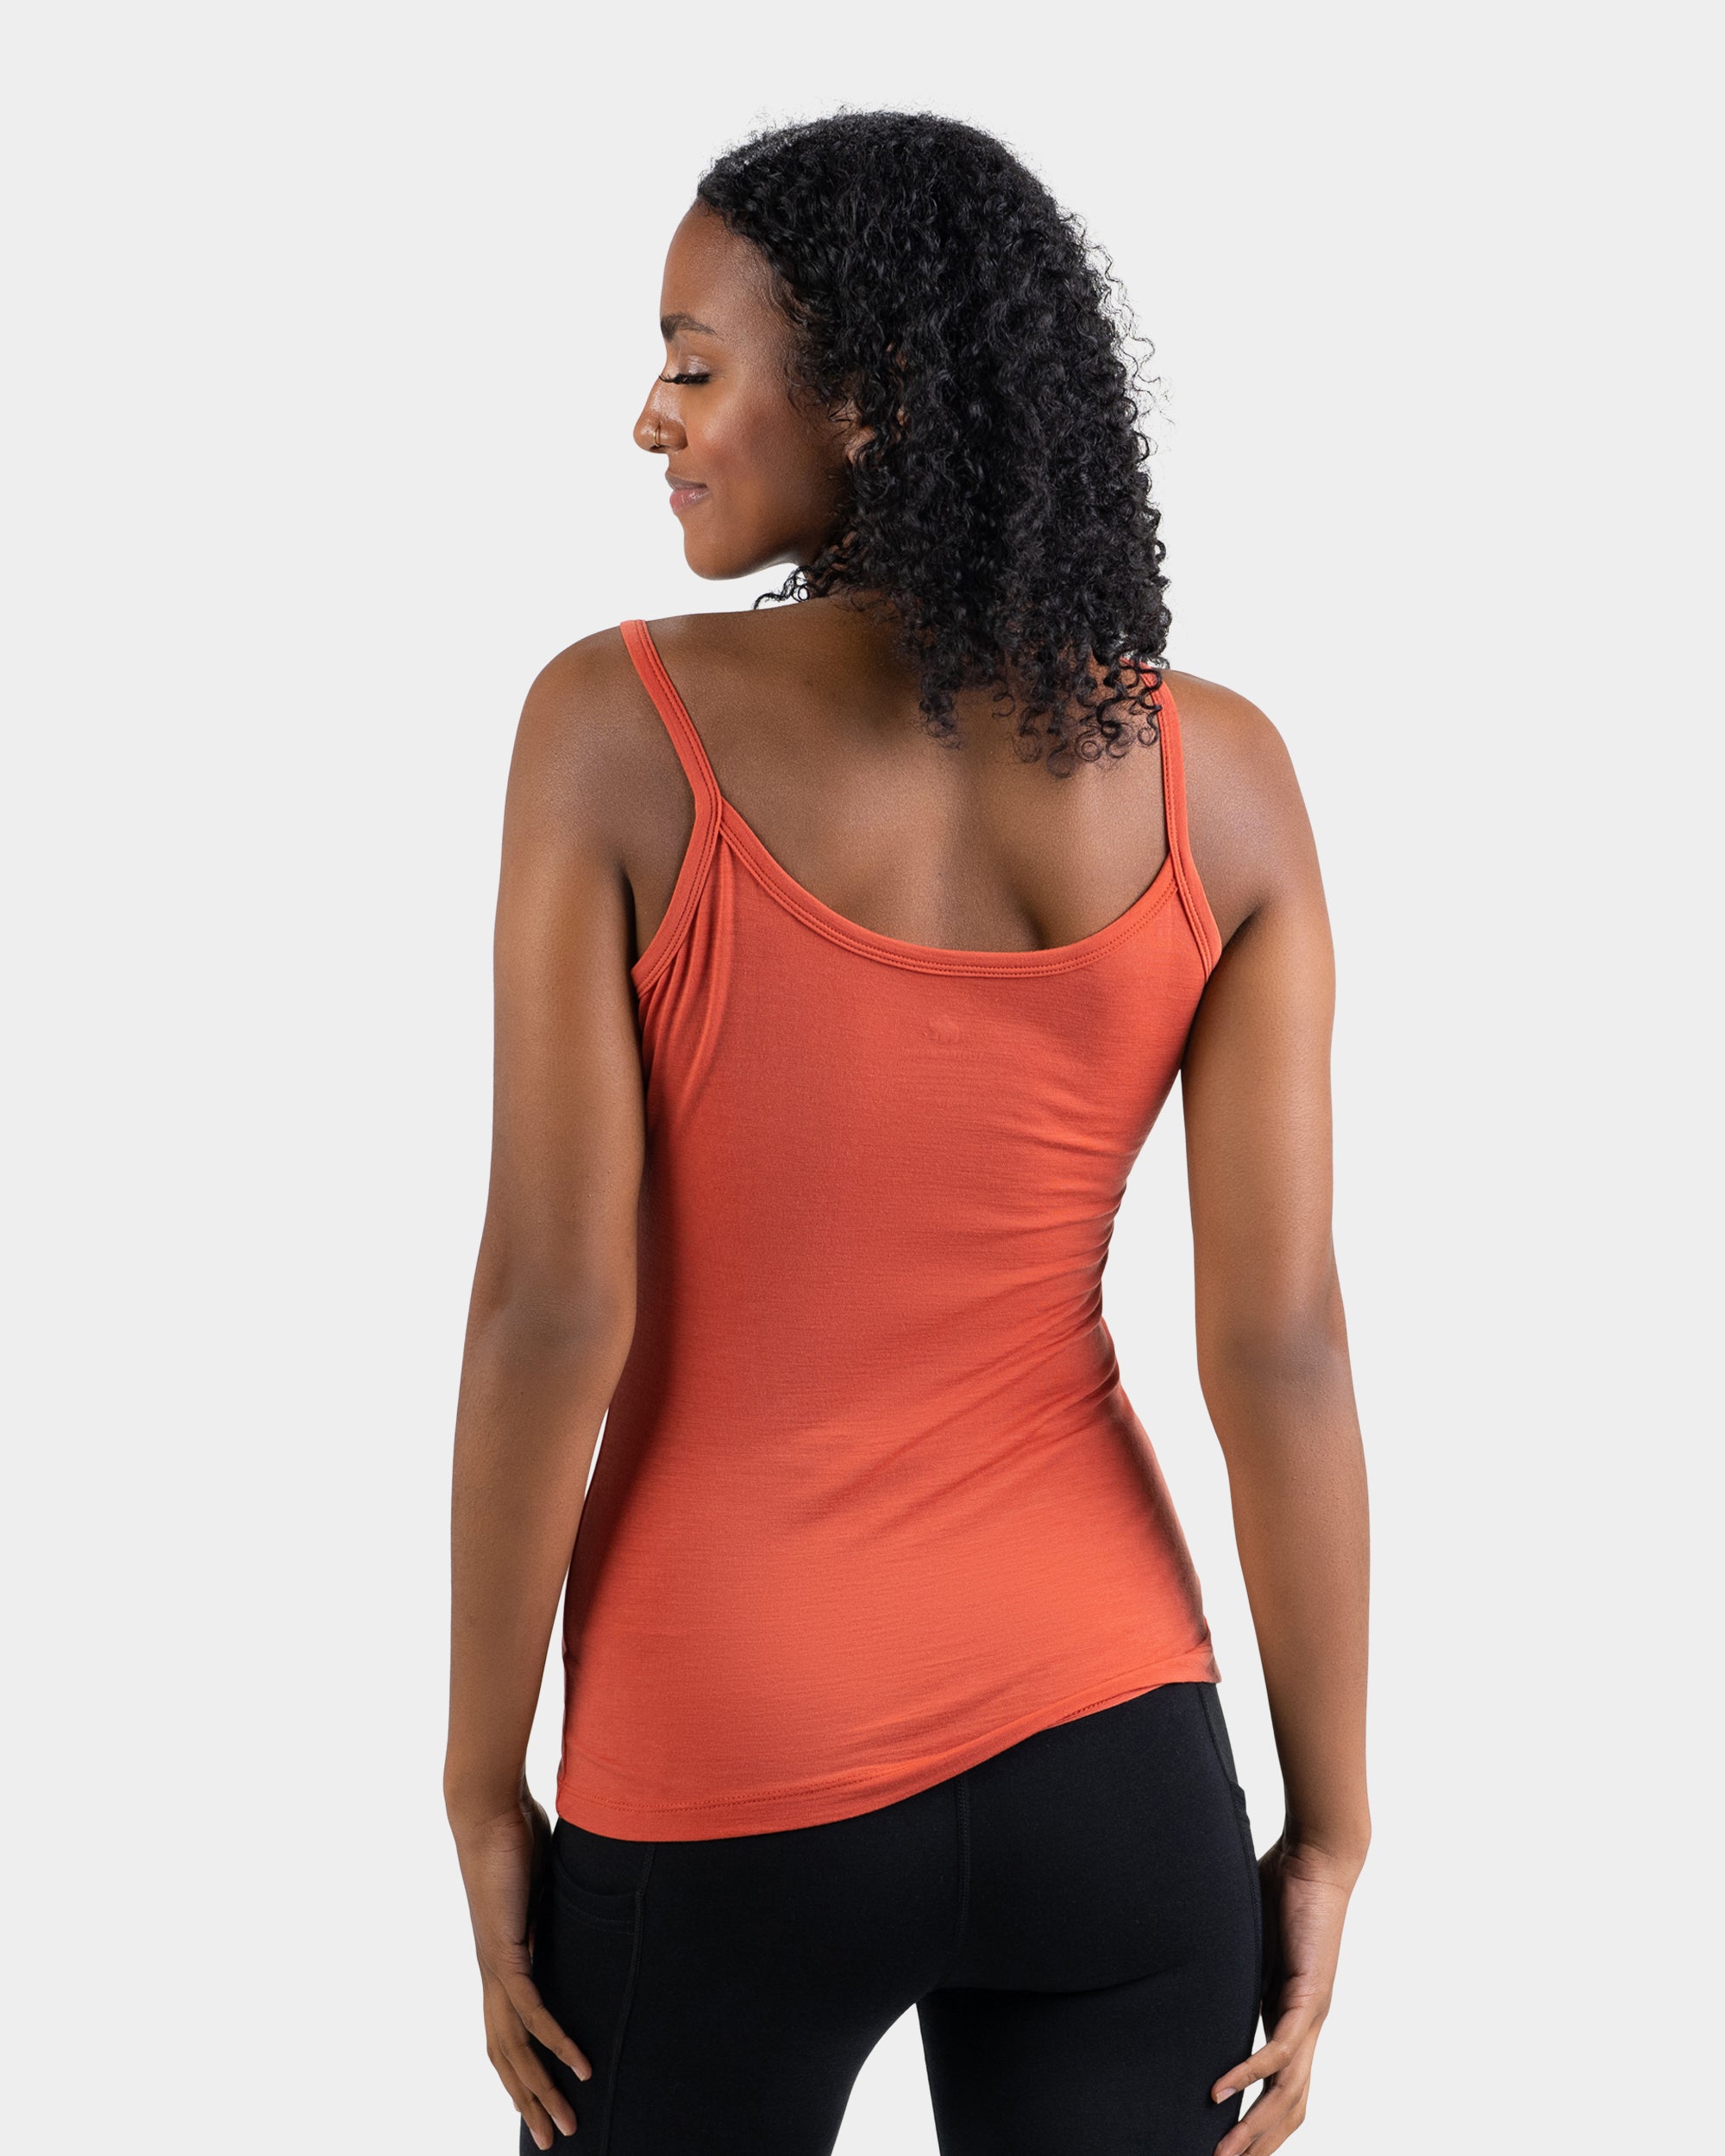 Womens Merino Wool Cami Tank Top With Built In Bra - Free Shipping